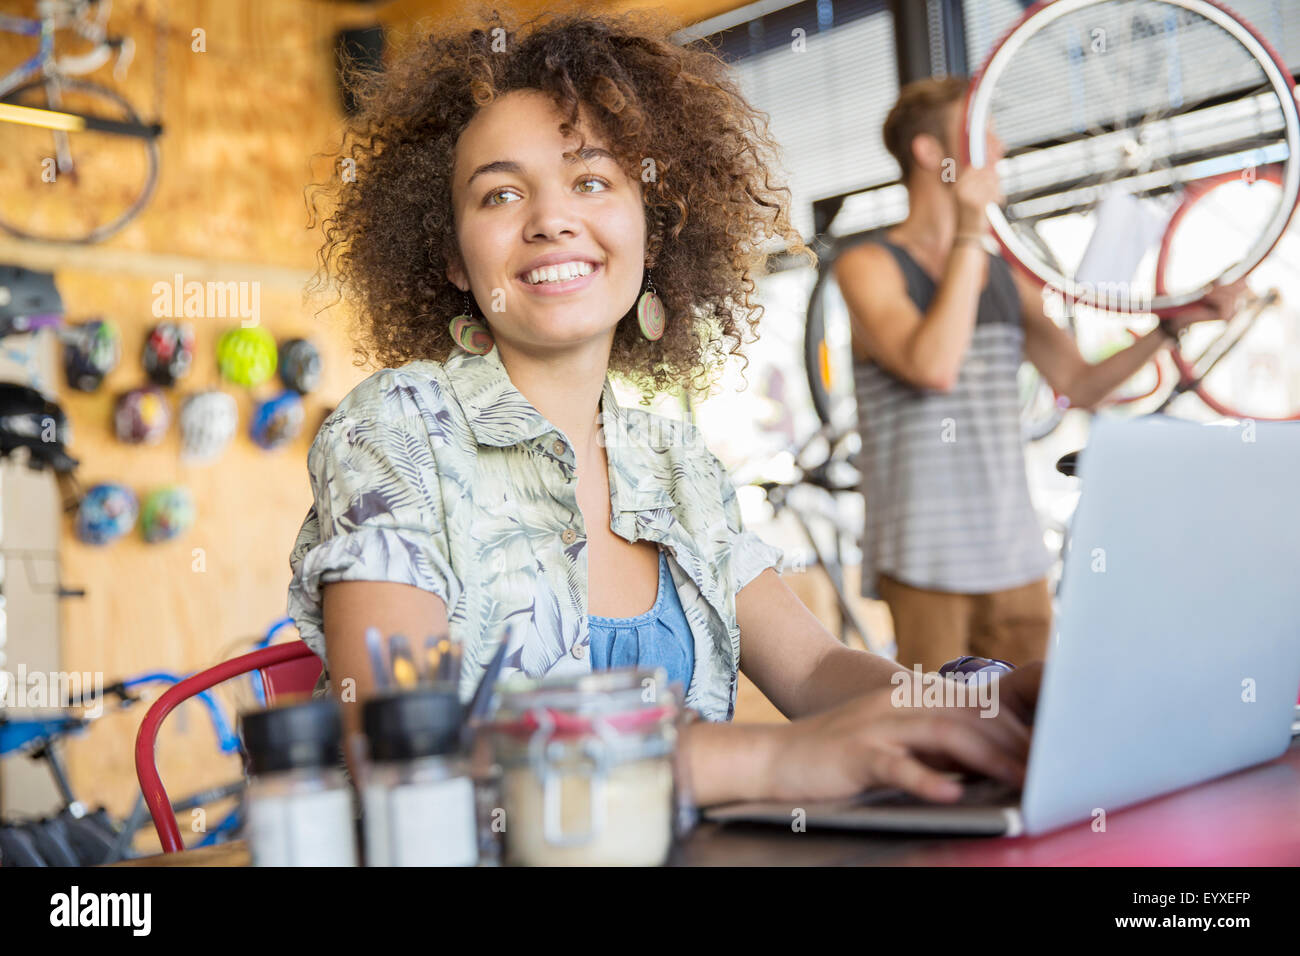 Smiling woman working at laptop in Bicycle shop Banque D'Images